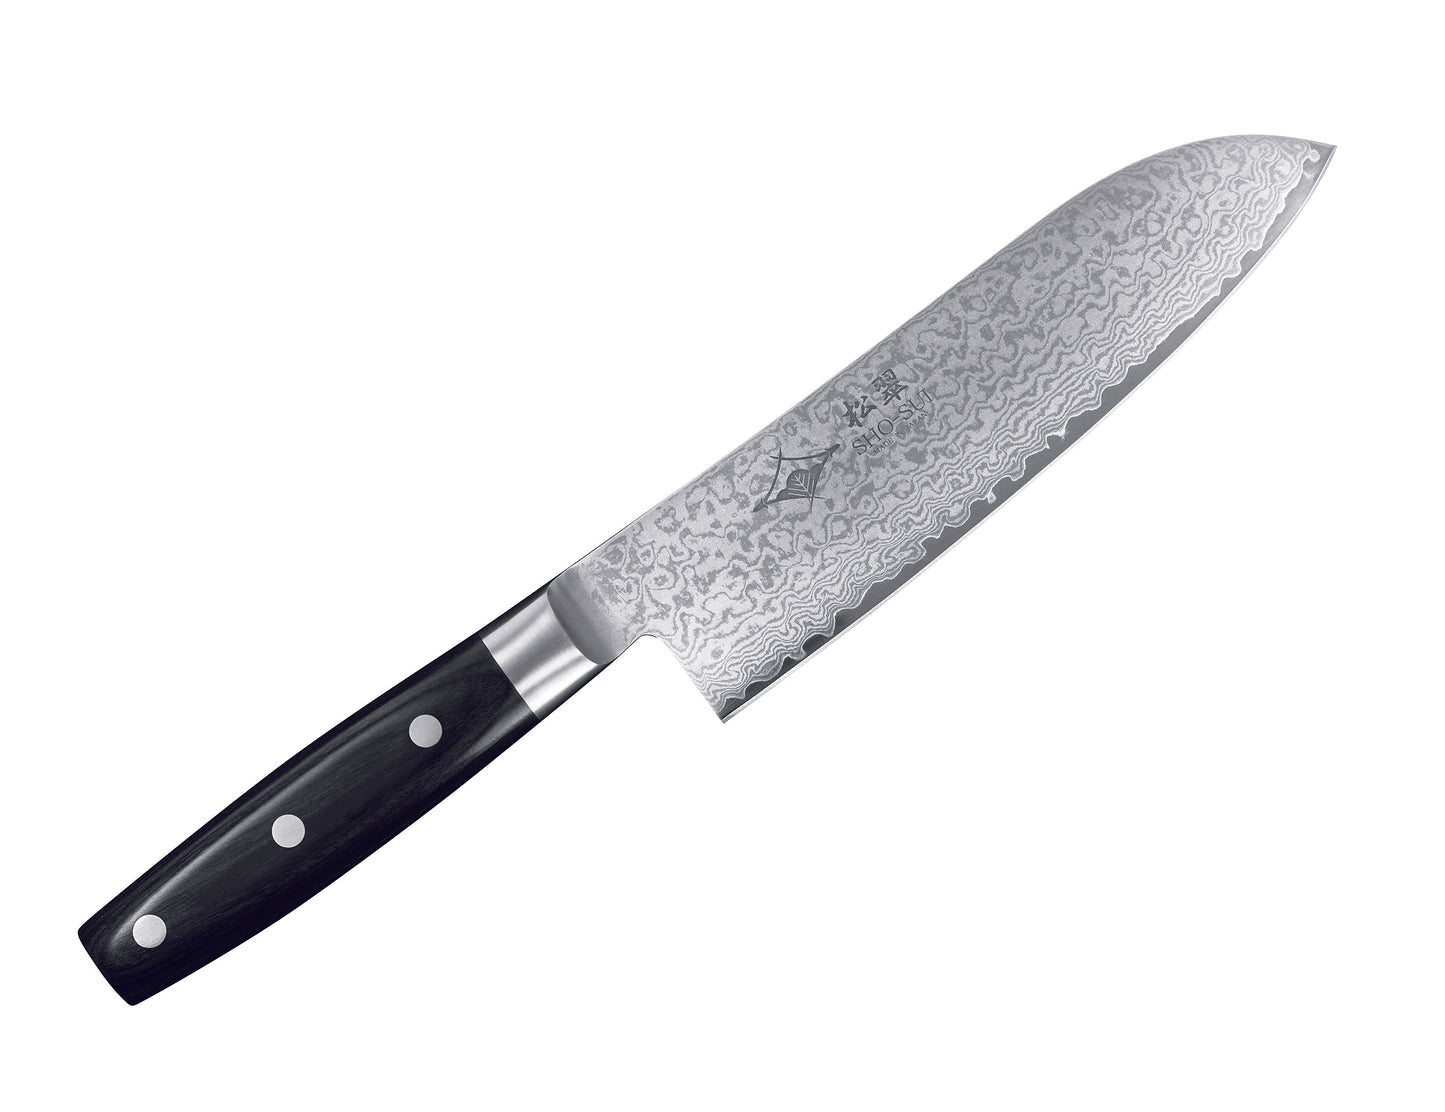 SHO-SUI 69 Layer Damascus Steel Knife Series